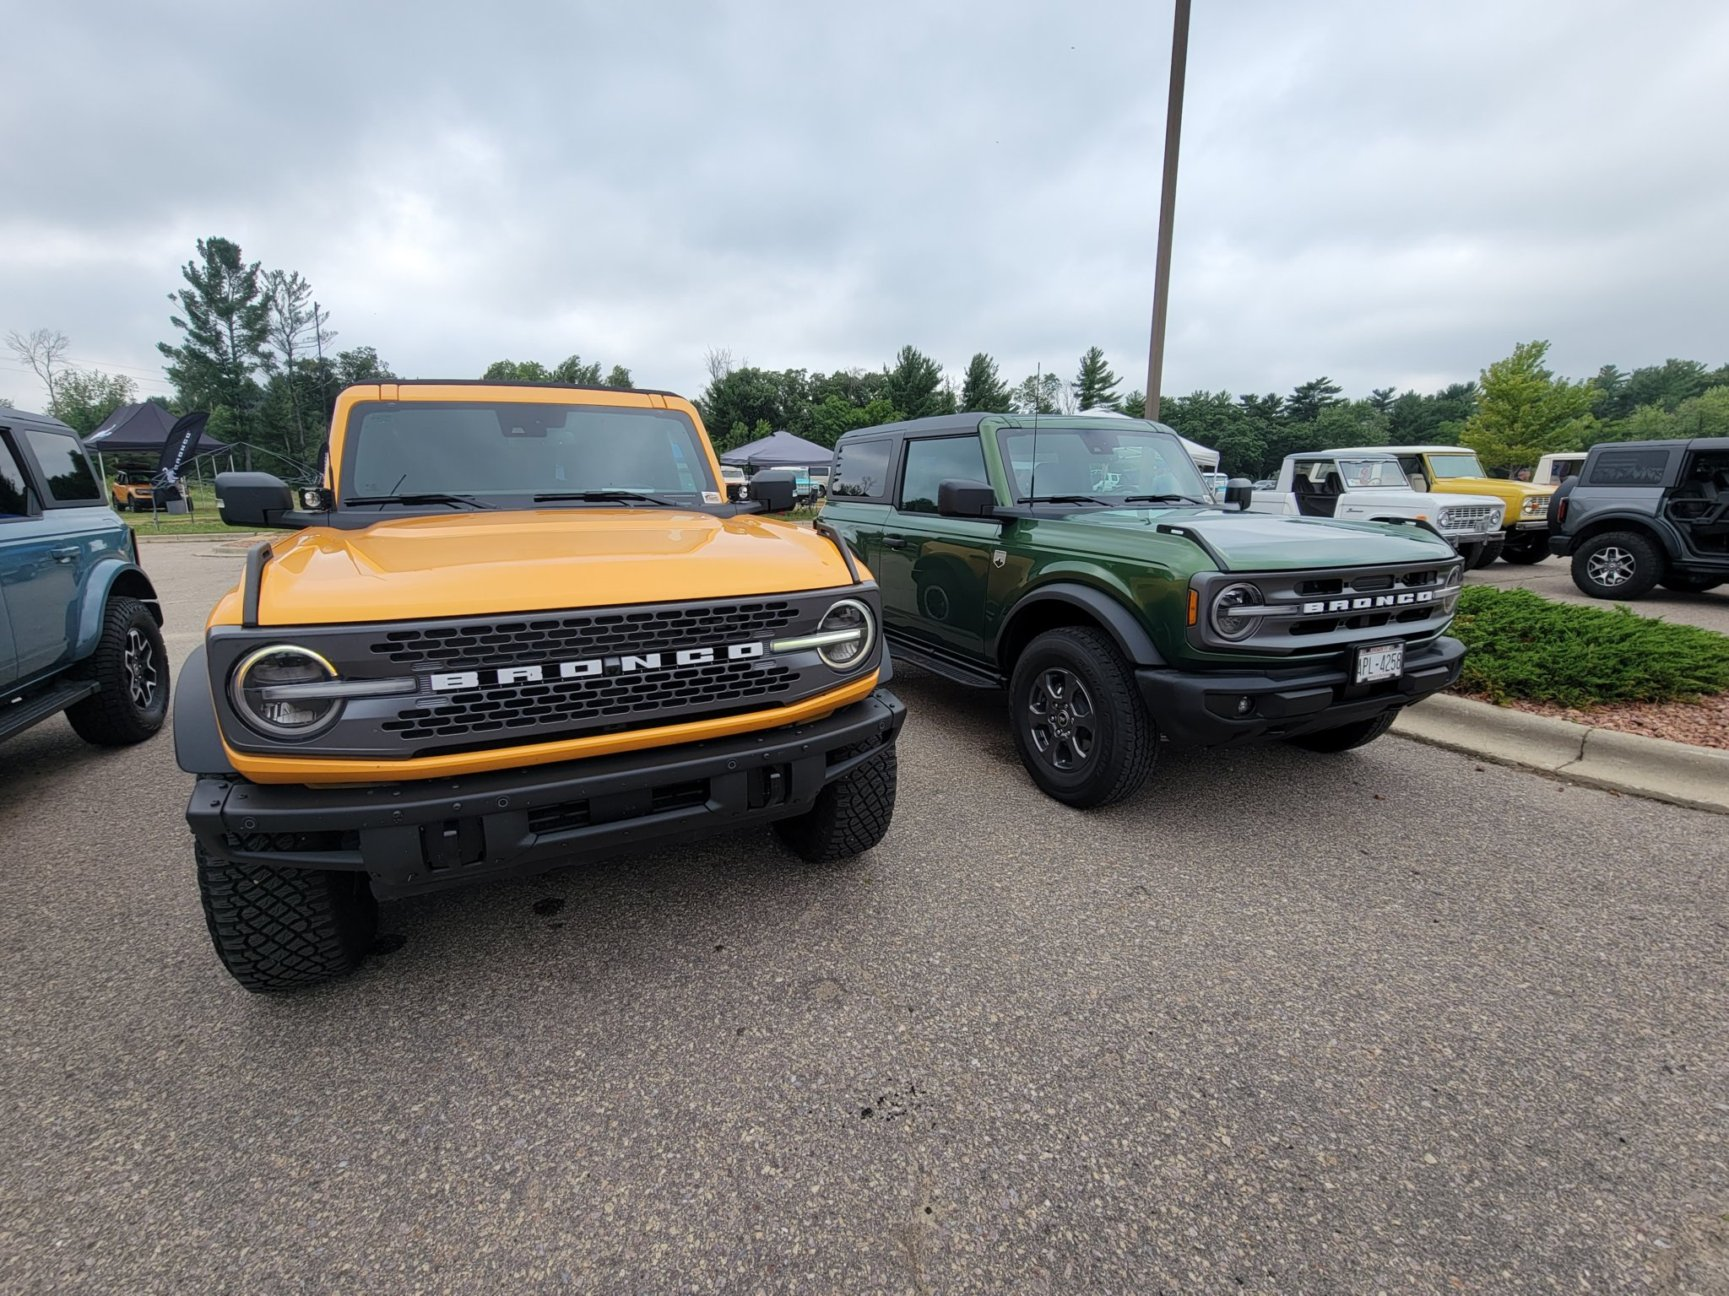 Ford Bronco Weird Request - Eruption Green & Cyber Orange side-by-side pics? 1660689657160